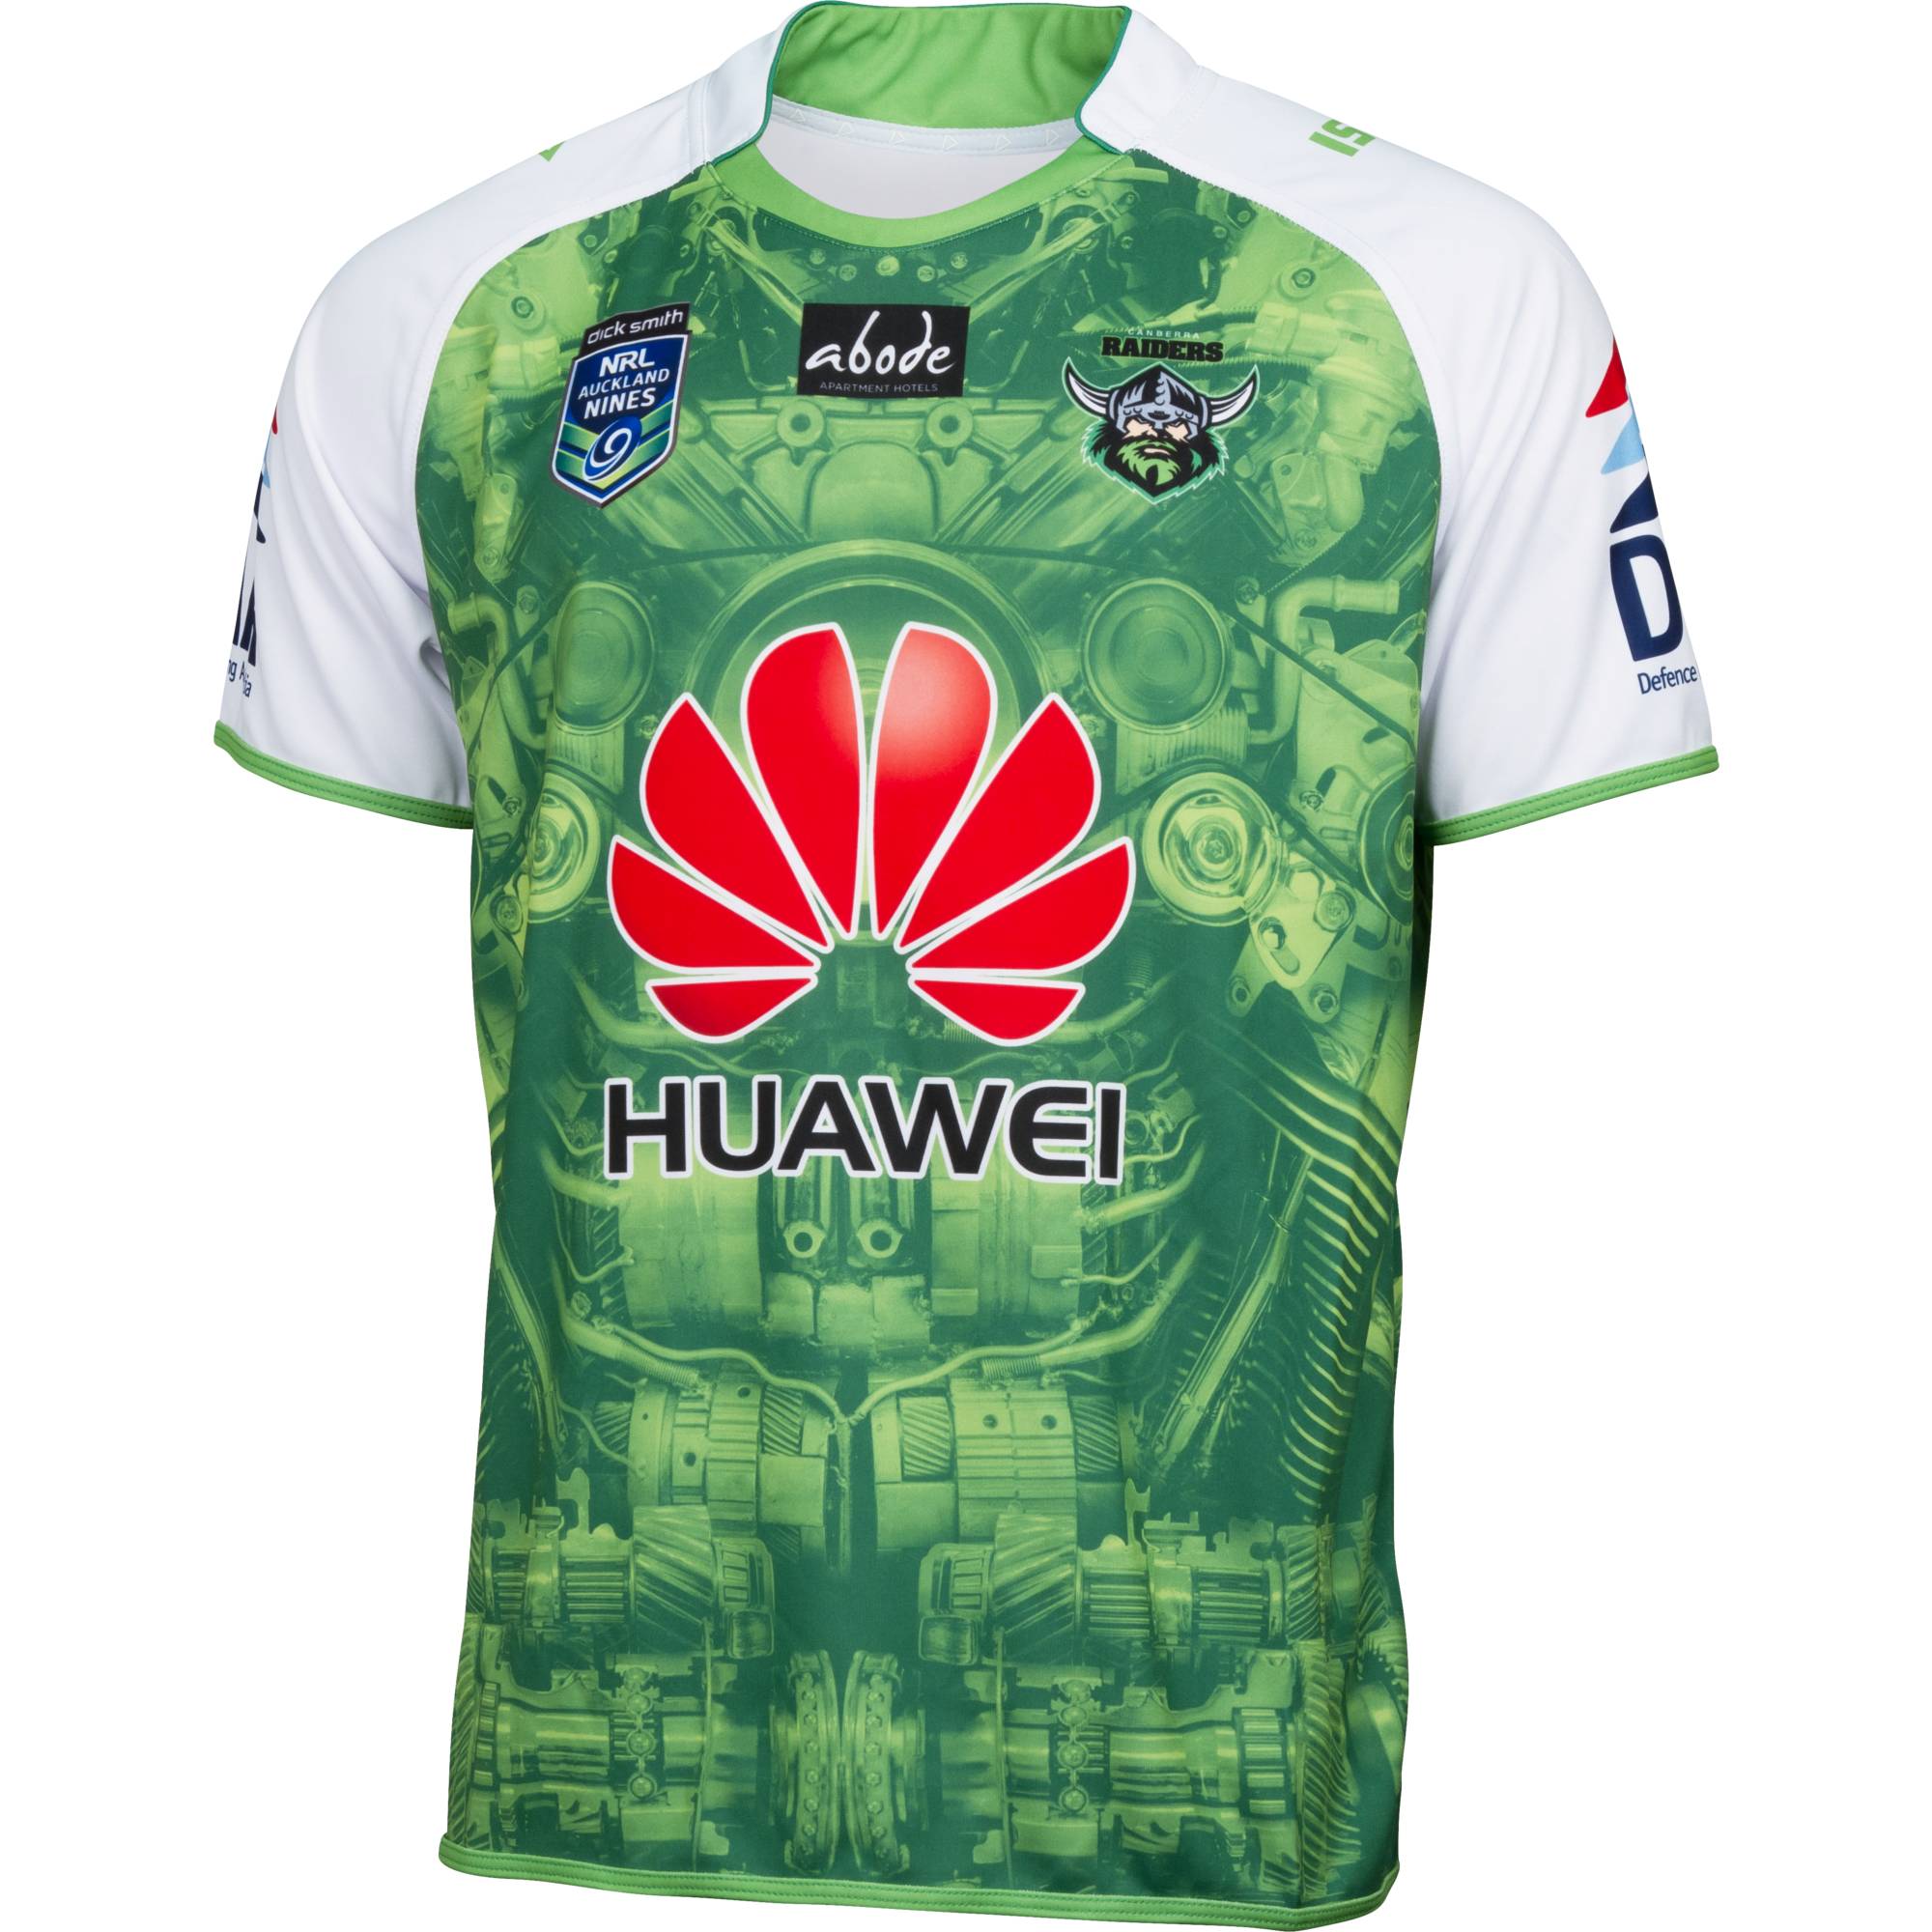 NRL Auckland Nines 2015 Shirt Round-up – Rugby Shirt Watch2000 x 2000